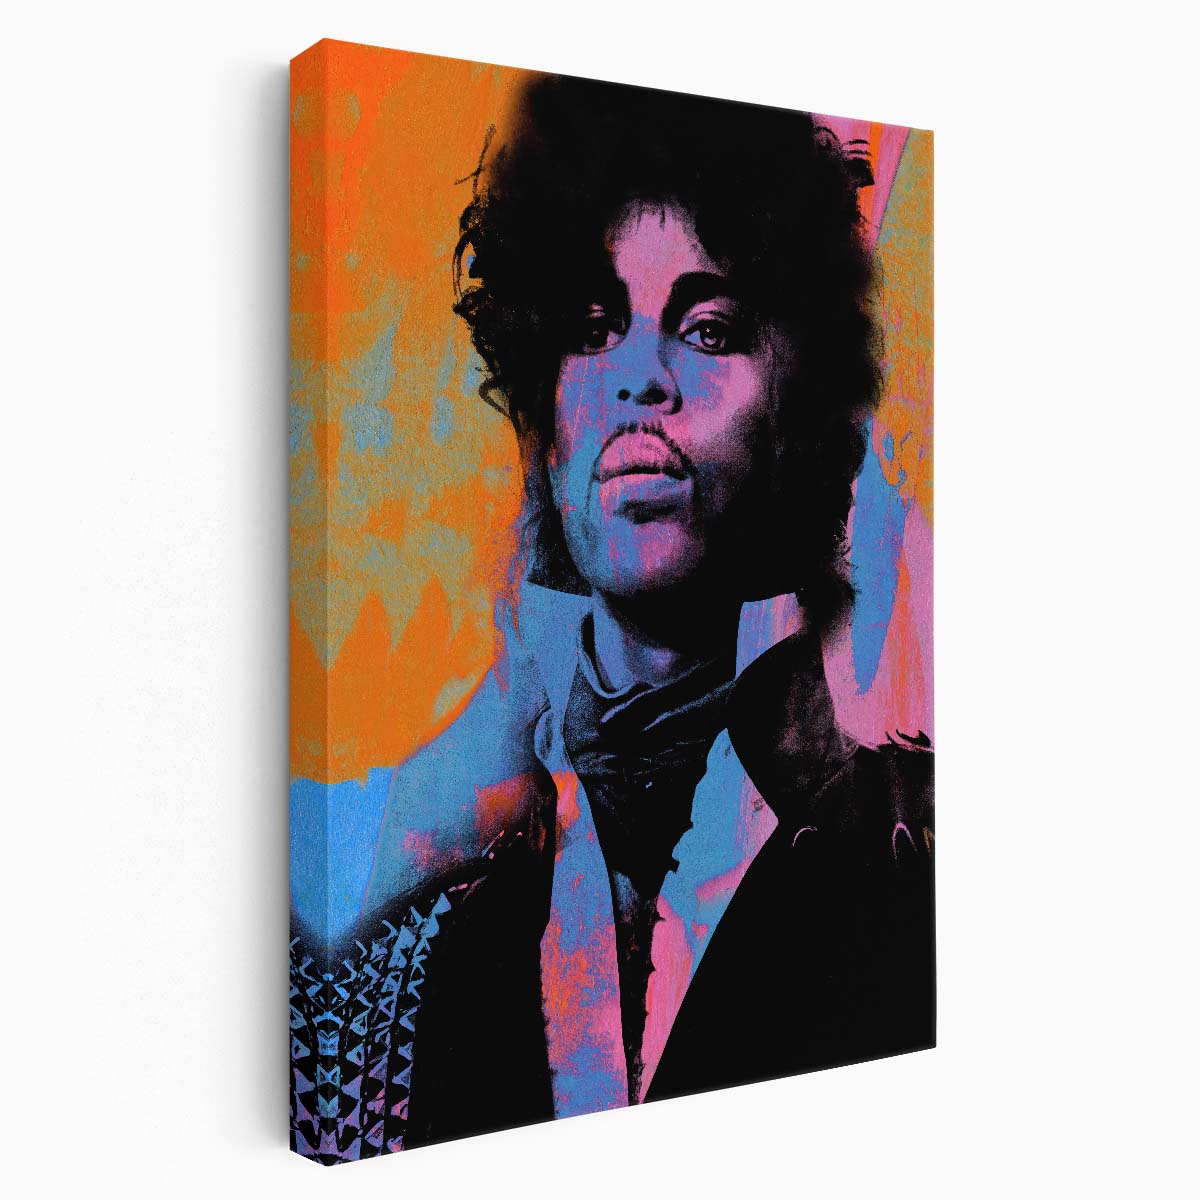 Prince Portrait Bright Colors Wall Art by Luxuriance Designs. Made in USA.